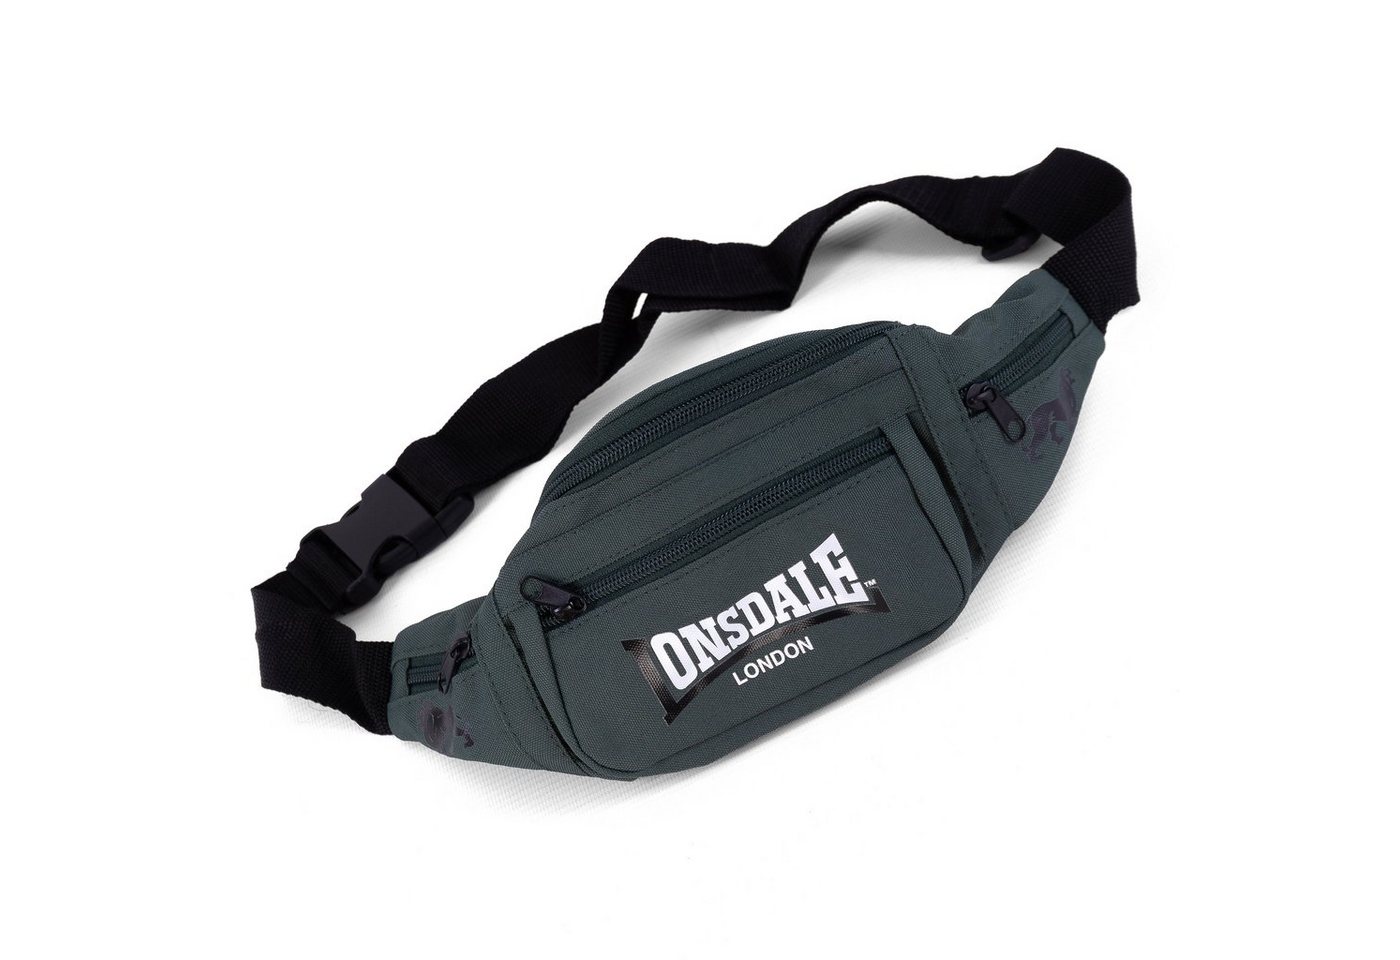 Lonsdale Gürteltasche Gürteltasche Lonsdale von Lonsdale